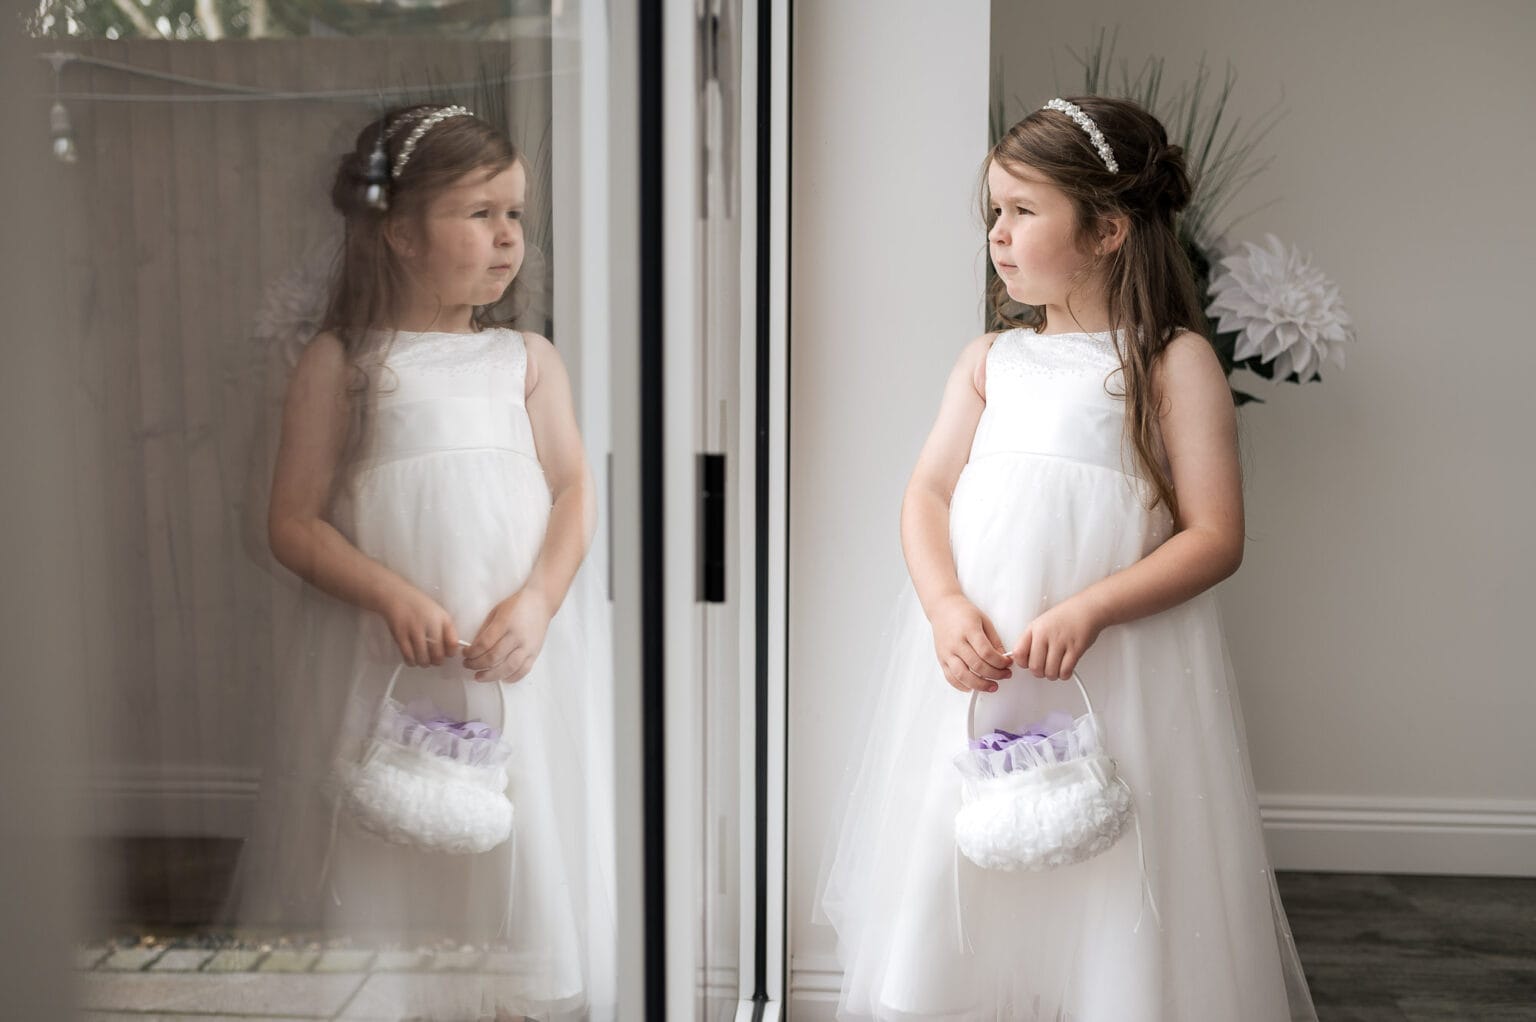 Flowergirl looks out of the window with a relection